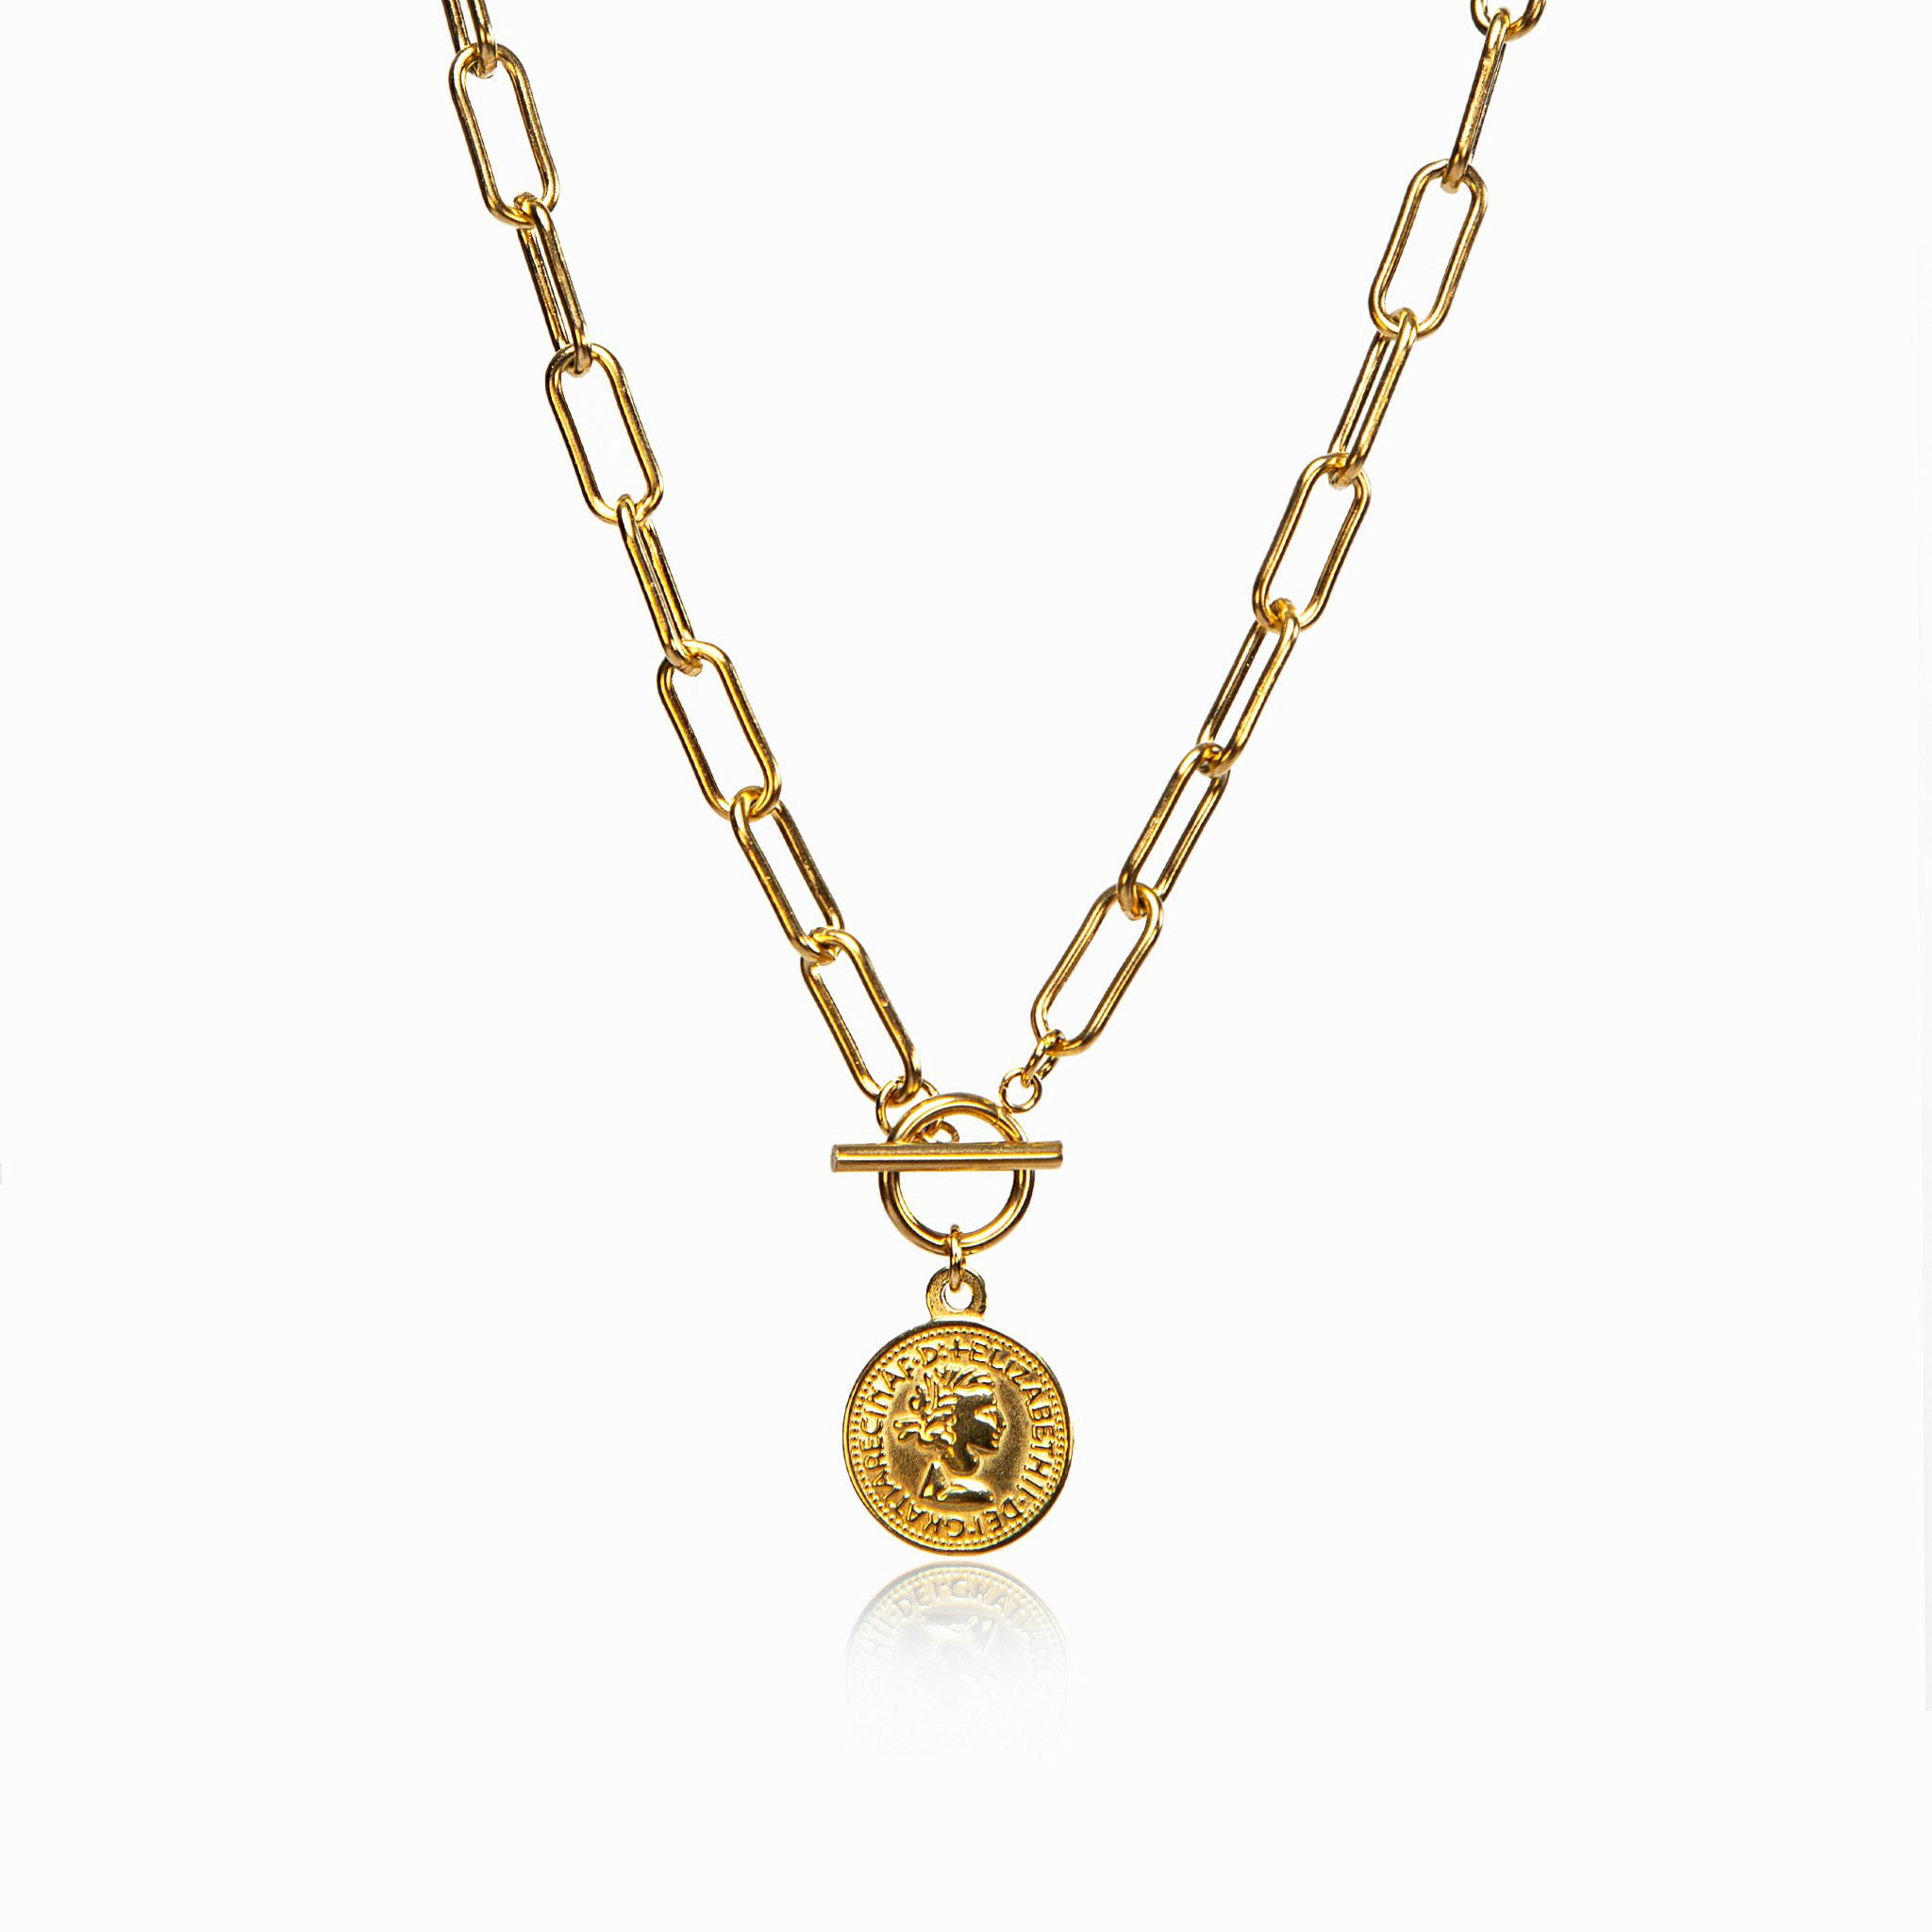 10 Cent Toggle Necklace - Gold 
USE CODE WOLF20 for 20% off